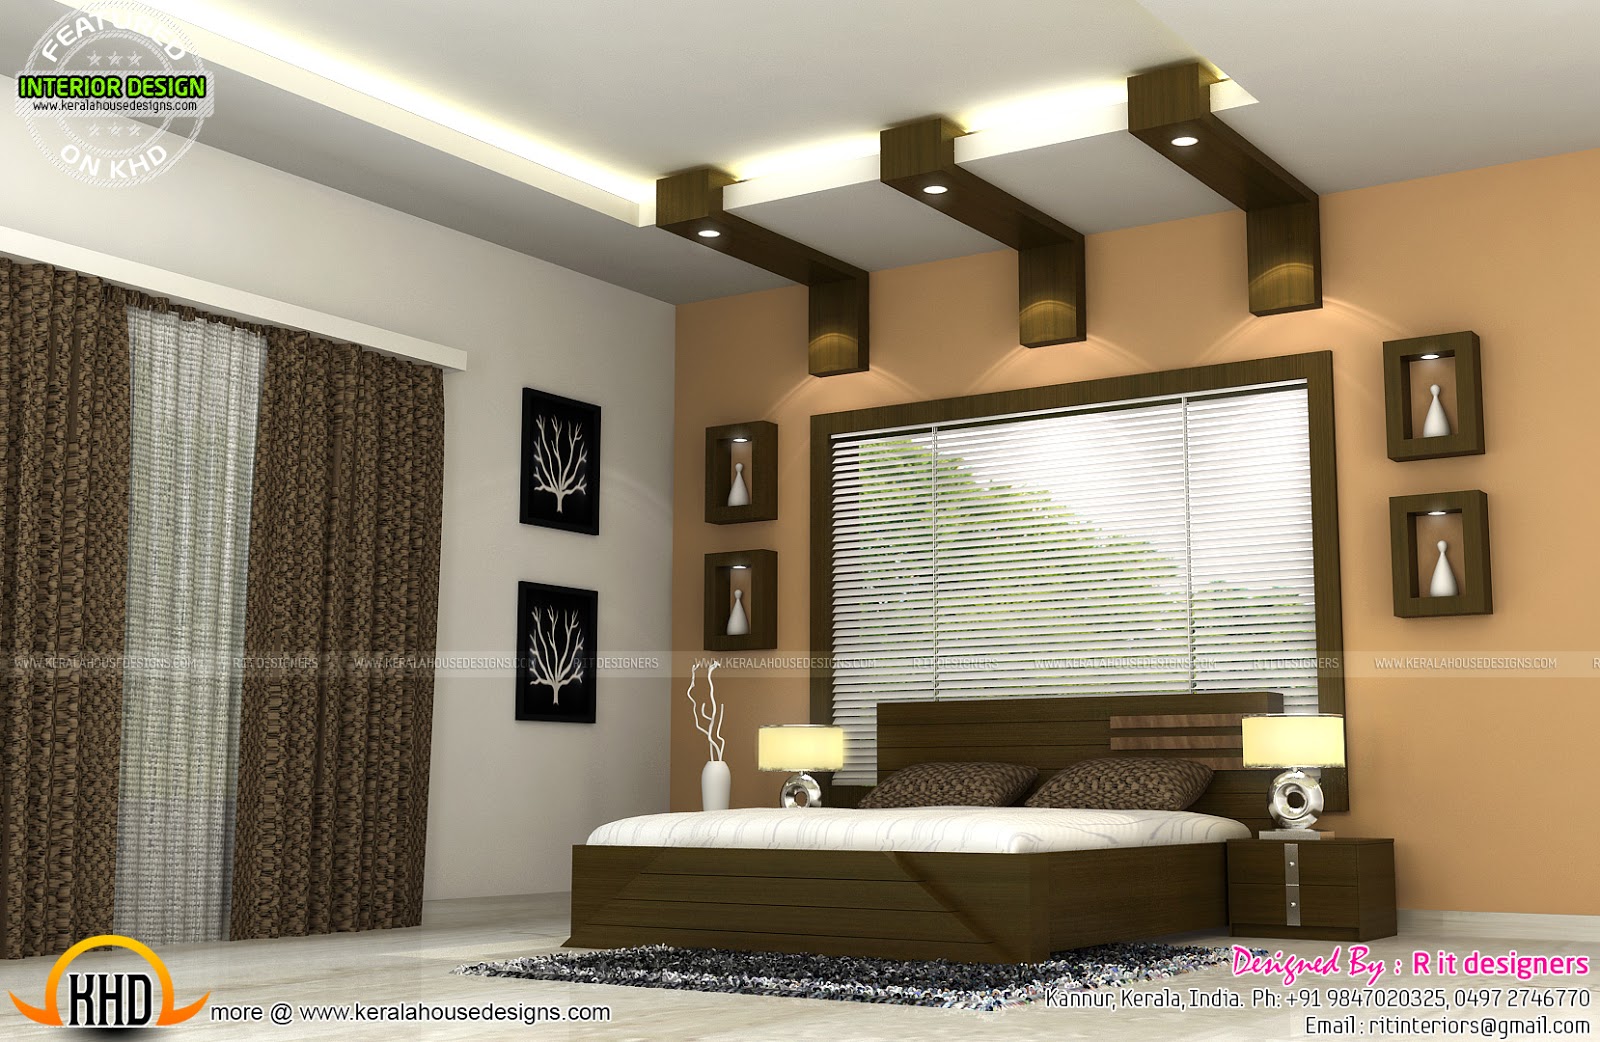  Interiors  of bedrooms and kitchen Kerala home  design  and 